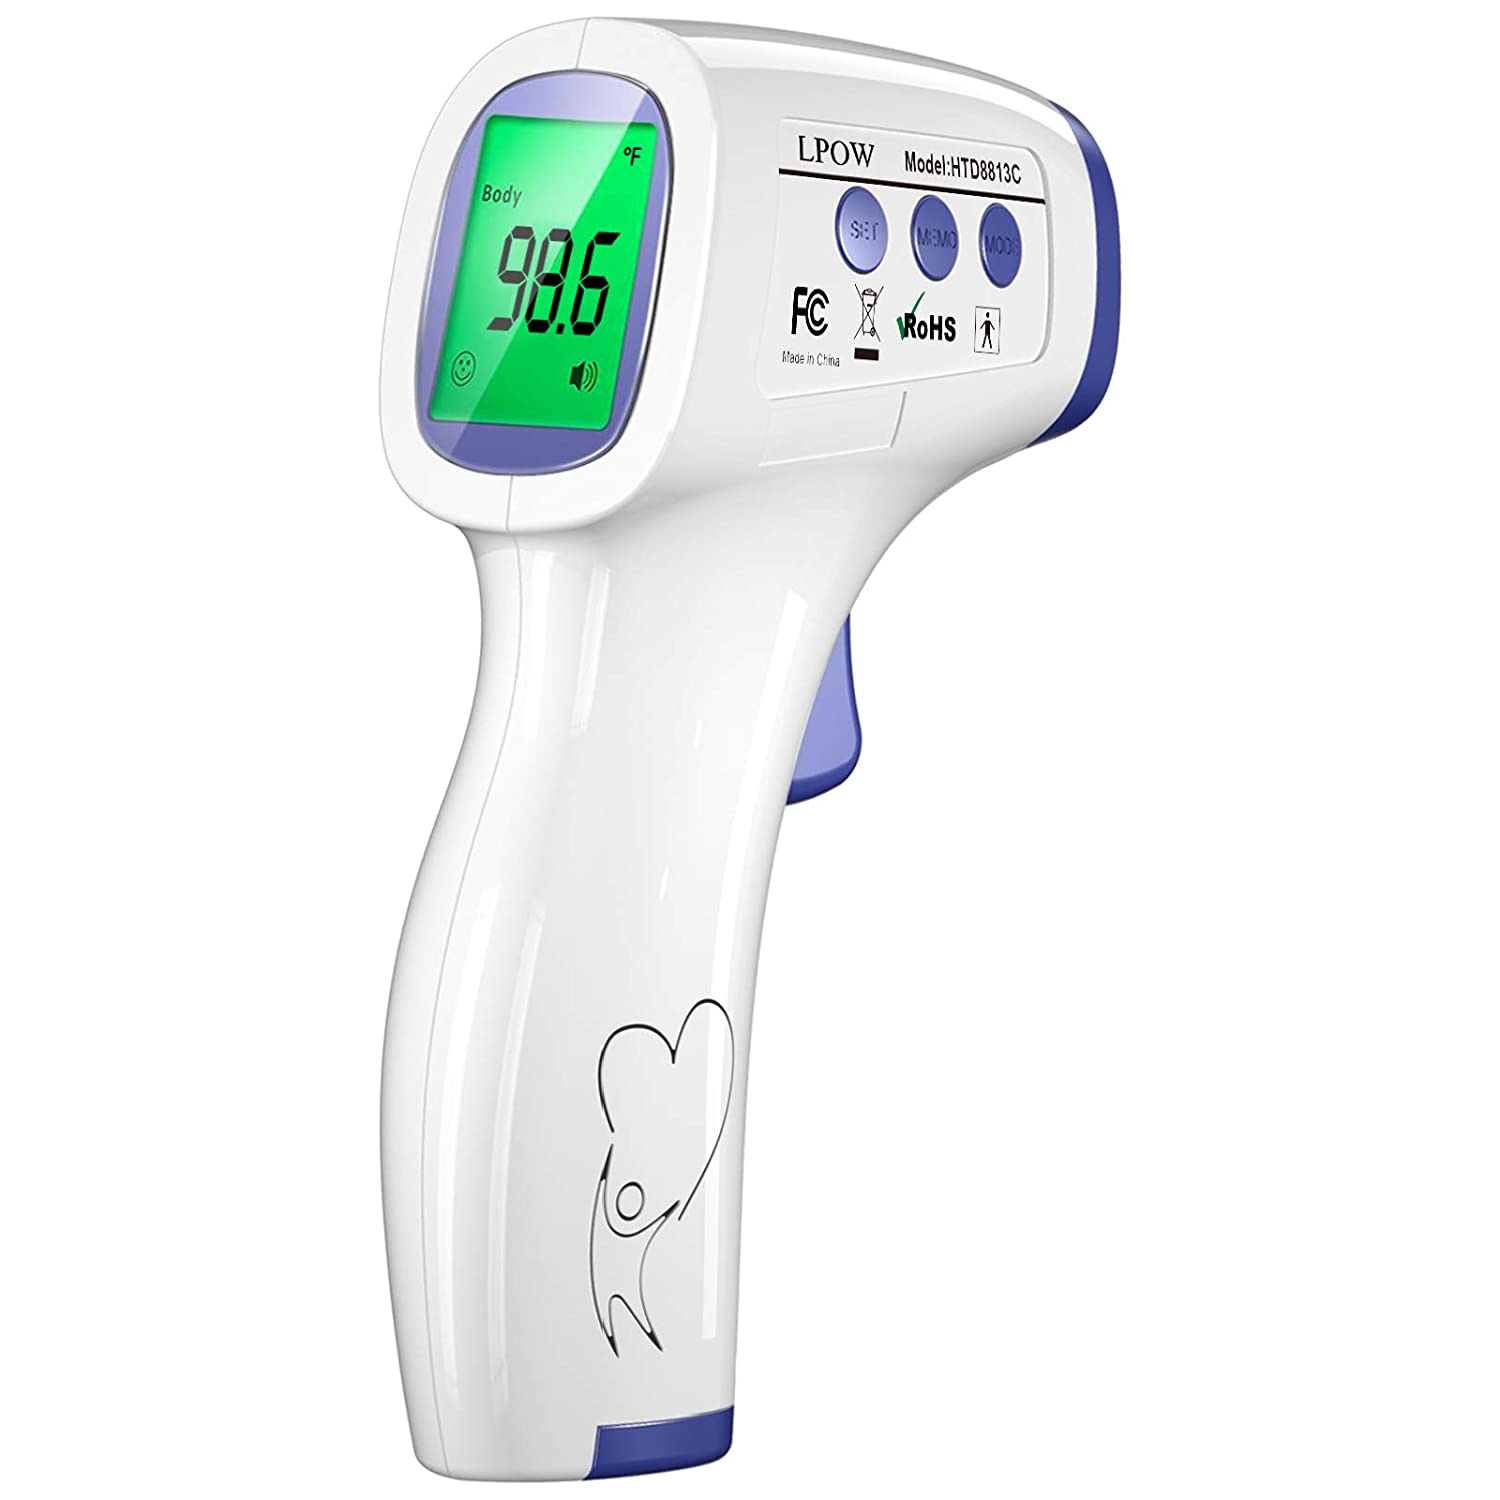 Photo 1 of LPOW Forehead Thermometer for Adults The Non Contact Infrared Baby Thermometer for Fever Body Thermometer and Surface Thermometer 2 in 1 Dual Mode Medical Thermometer